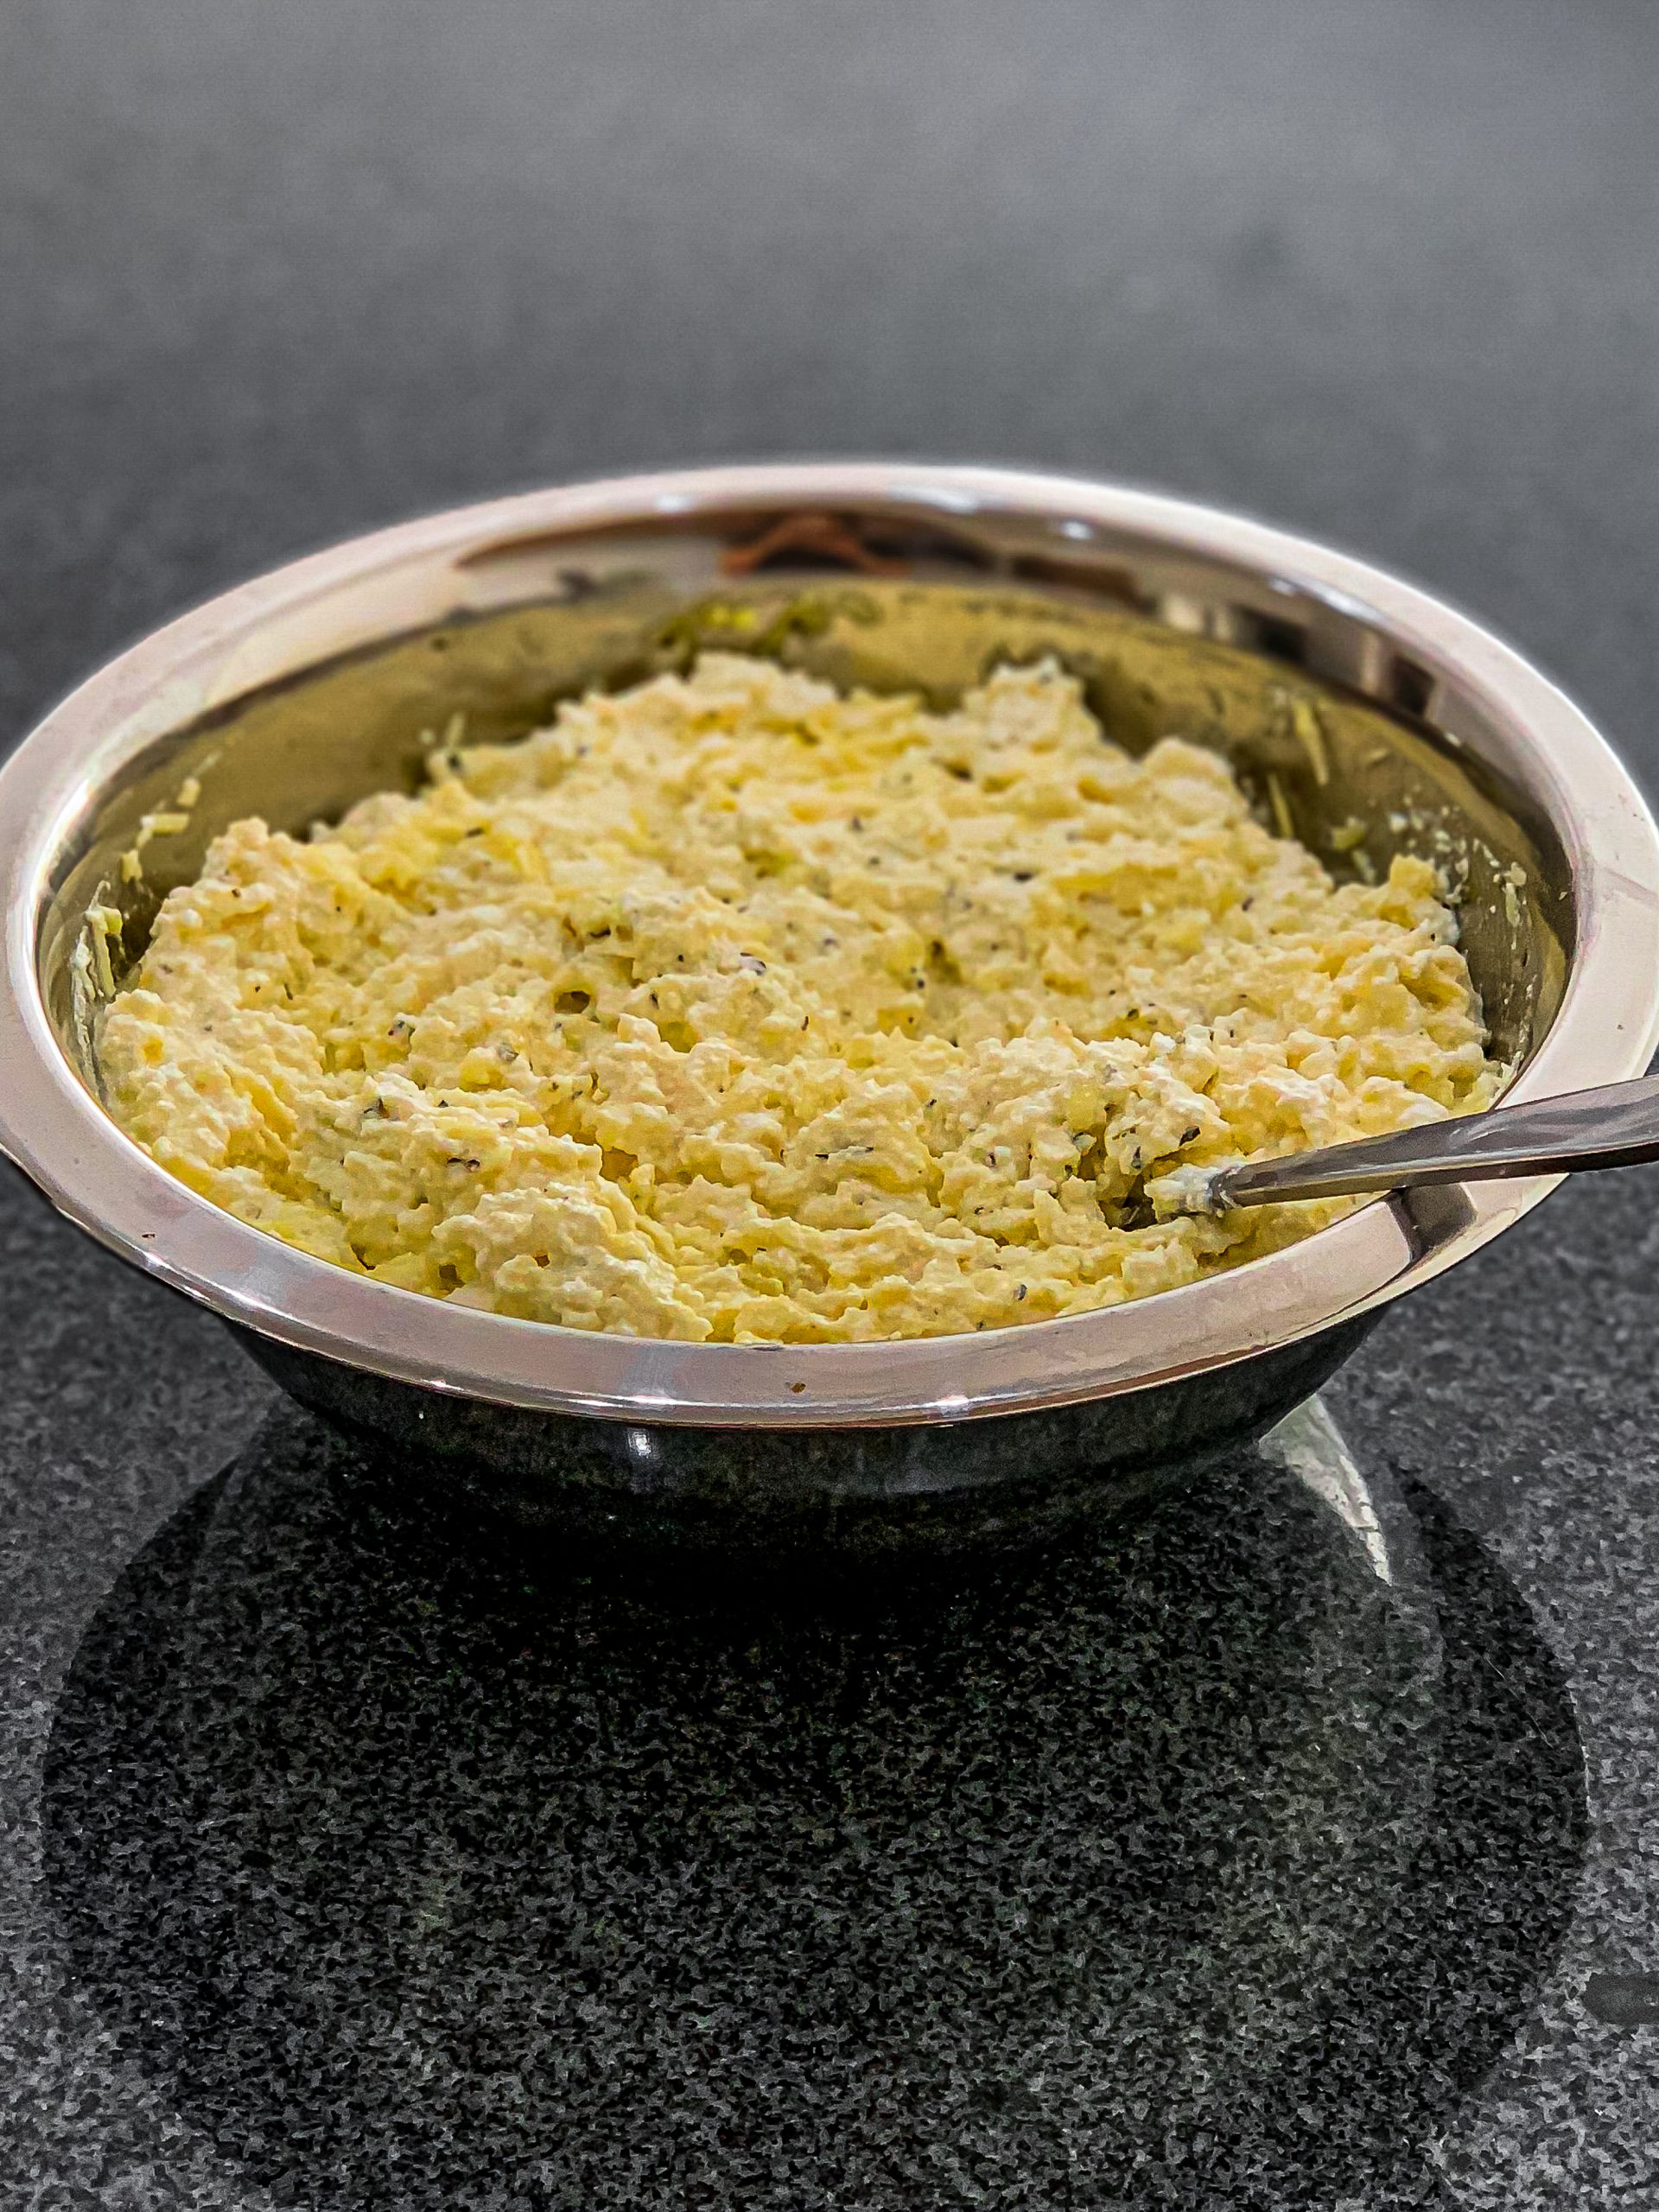 In a separate bowl, mix the ricotta cheese with an egg, mozzarella cheese, 1 teaspoon Italian seasoning, and parmesan cheese.